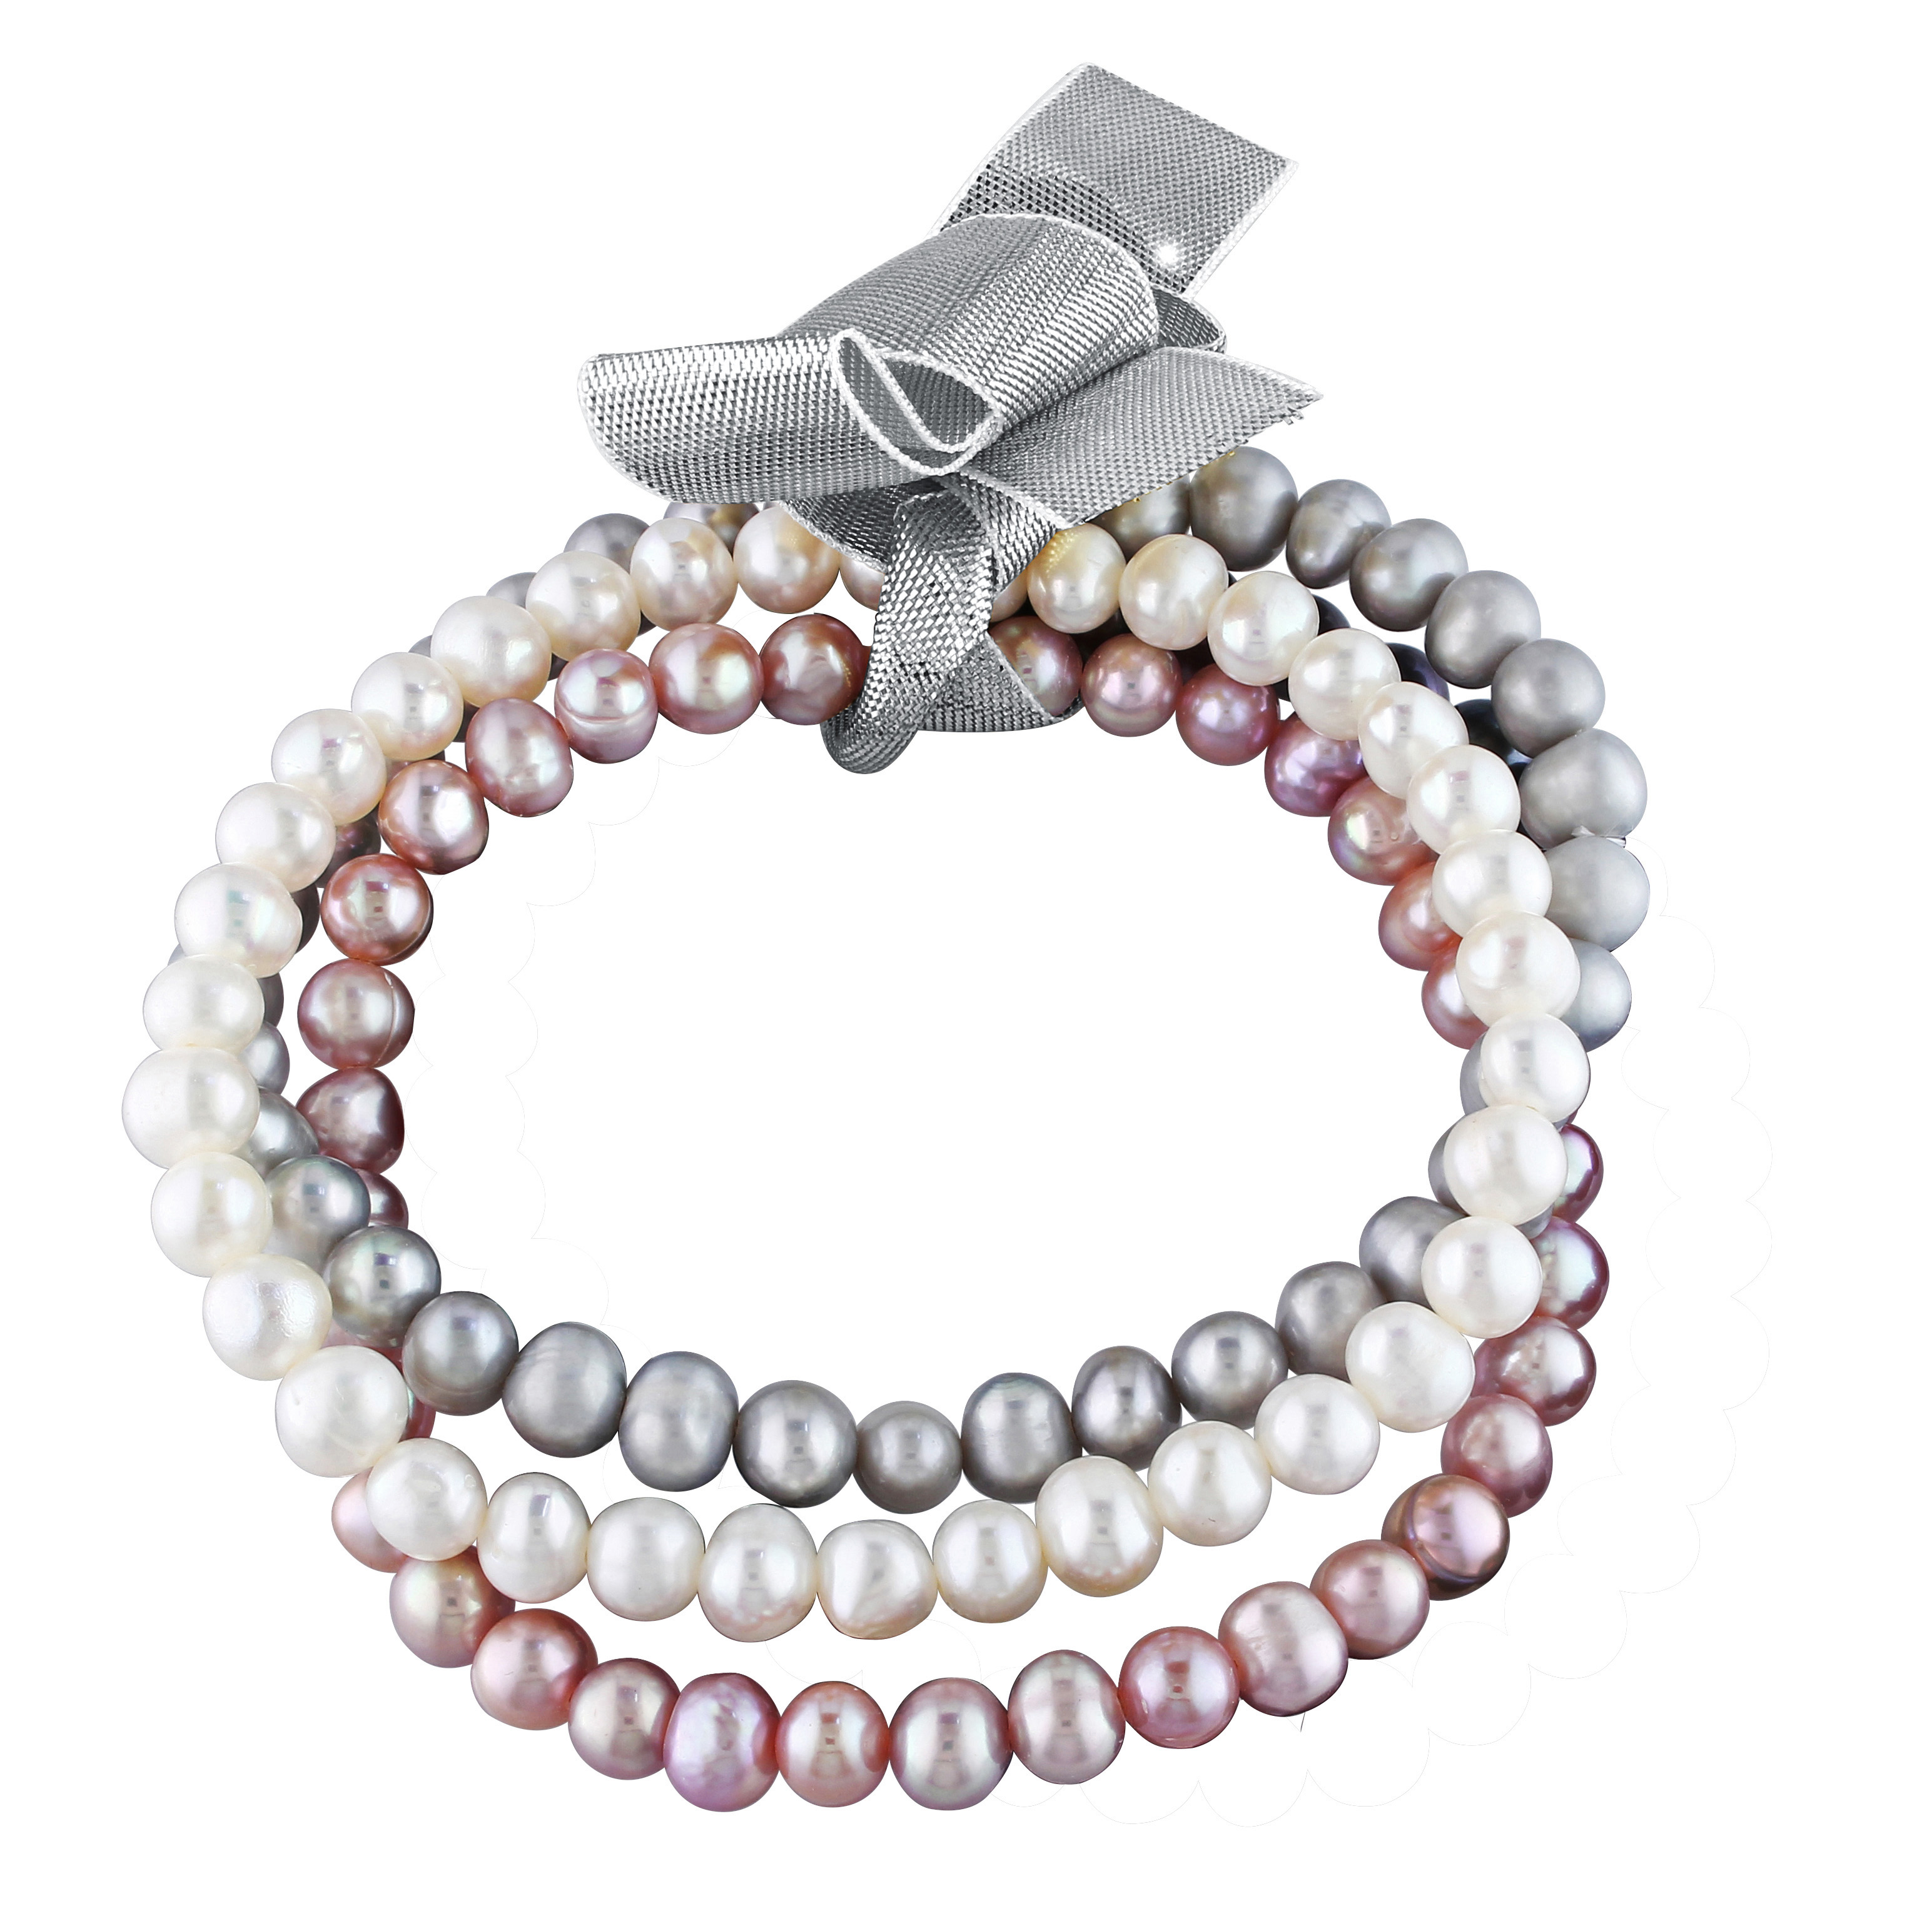 5-5.5 MM White, Pink and Grey Freshwater Cultured Pearl Bracelet Set of 3 with Ribbon